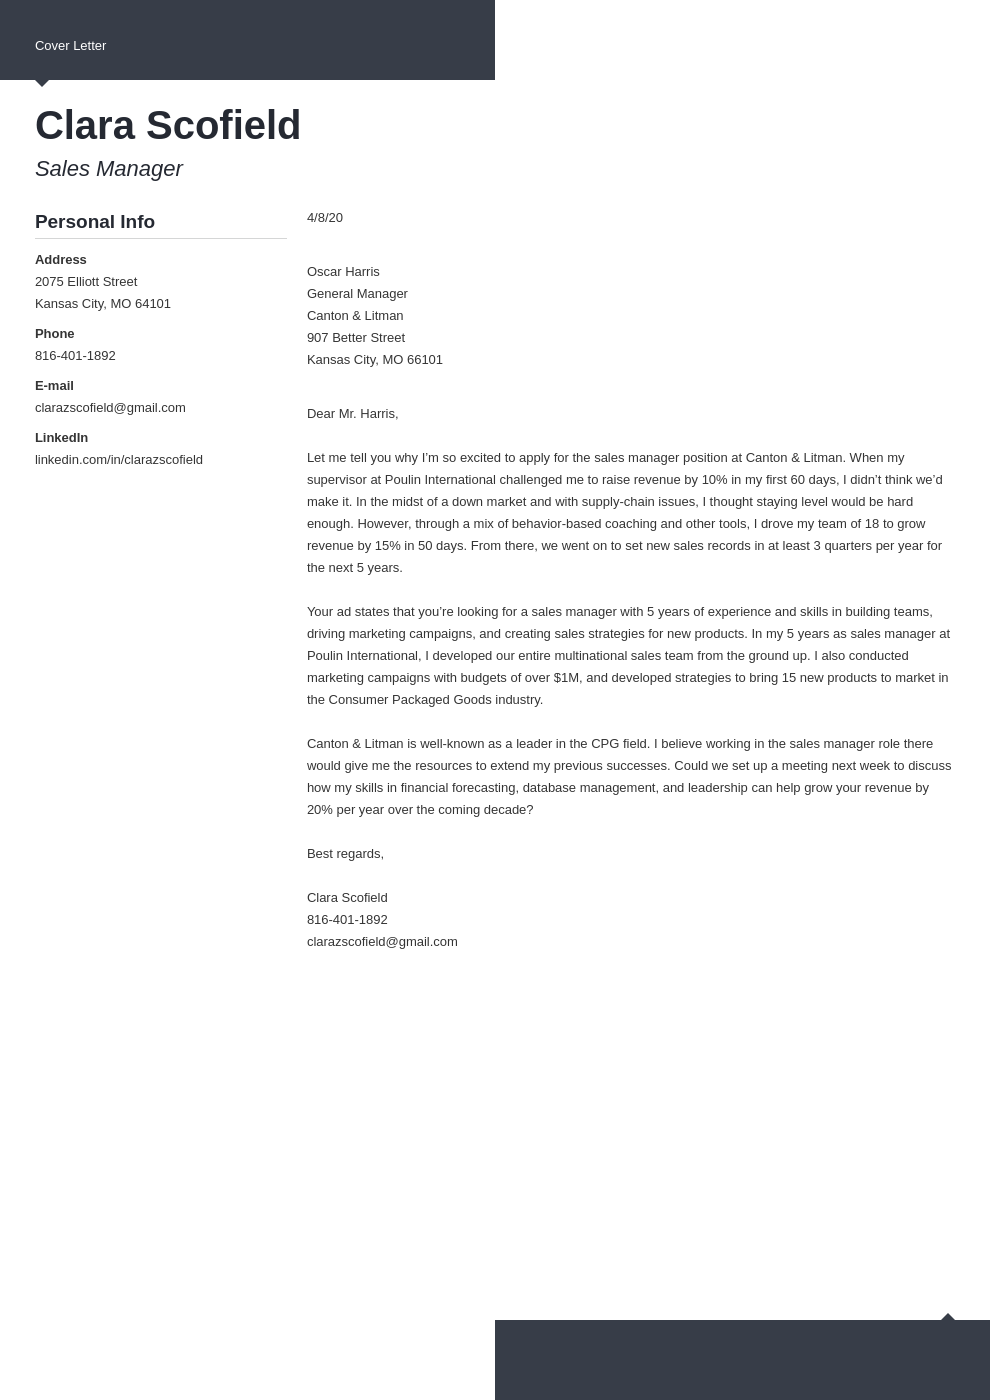 sales manager cover letter examples uk